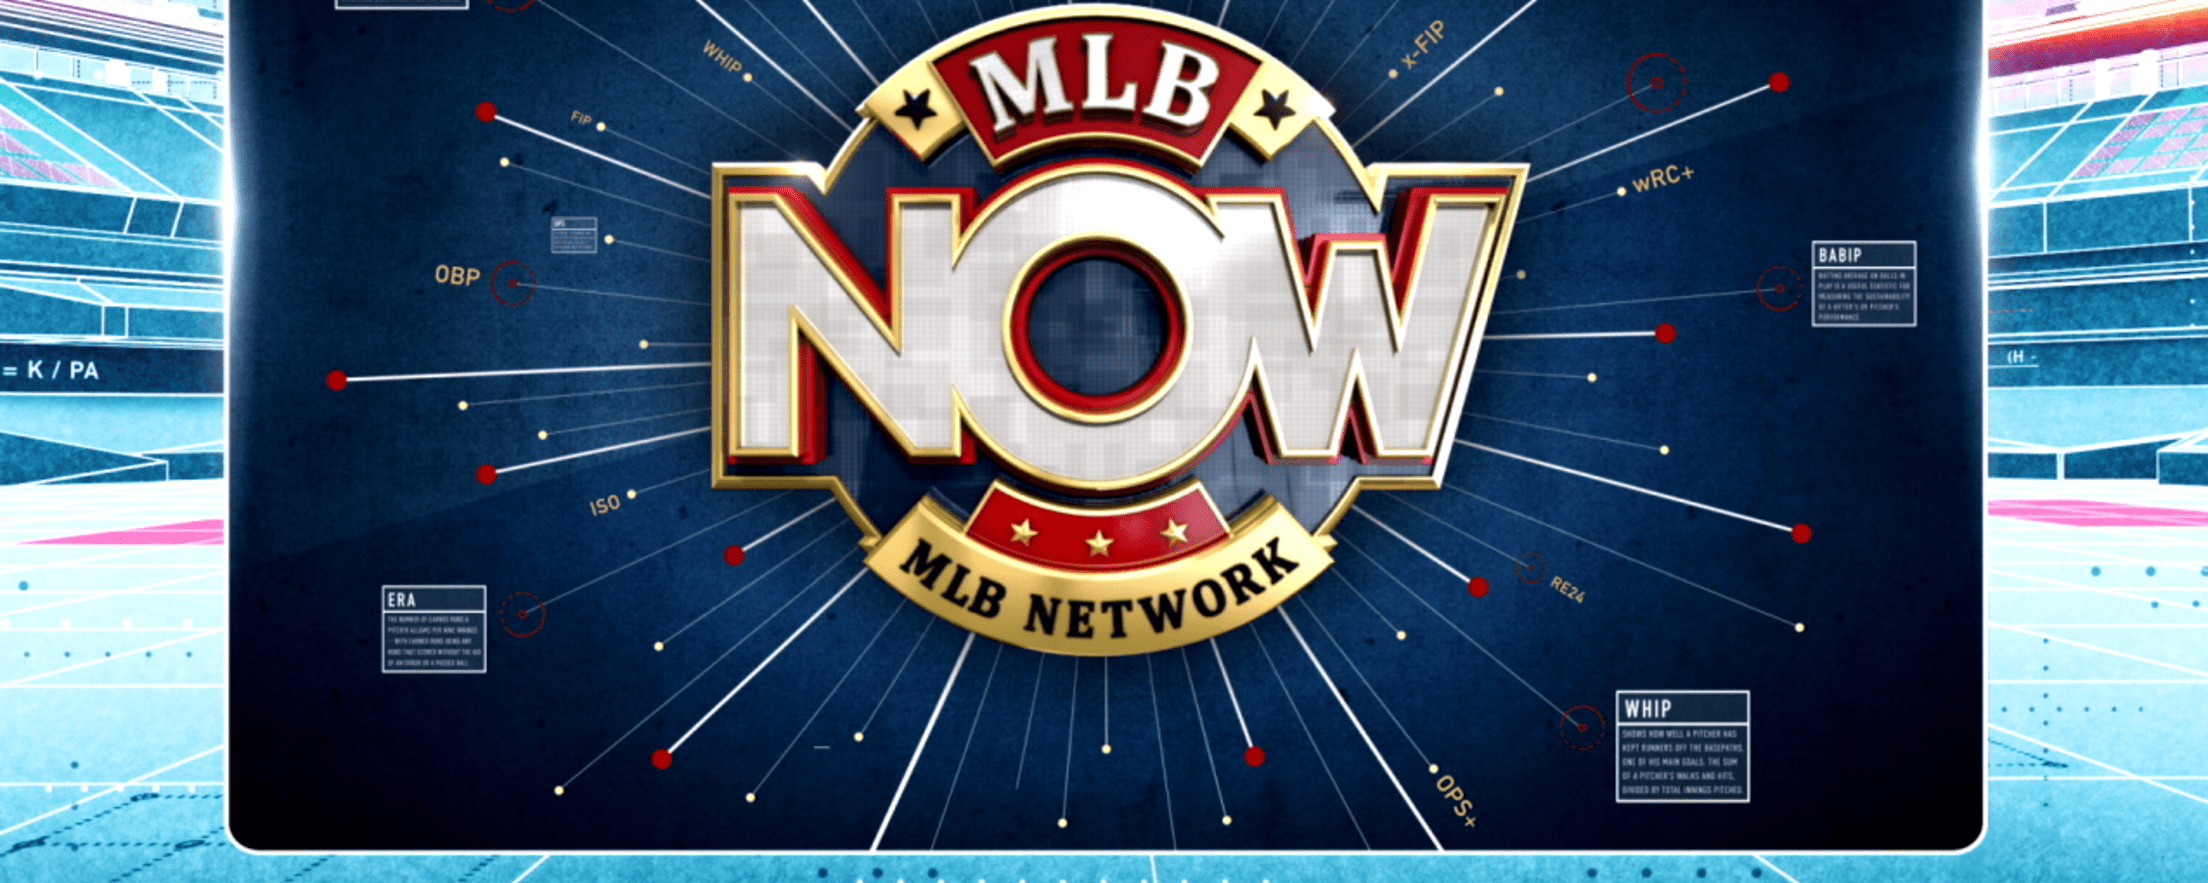 MLB Network Adding an Hour to 'MLB Central' Beginning Opening Day